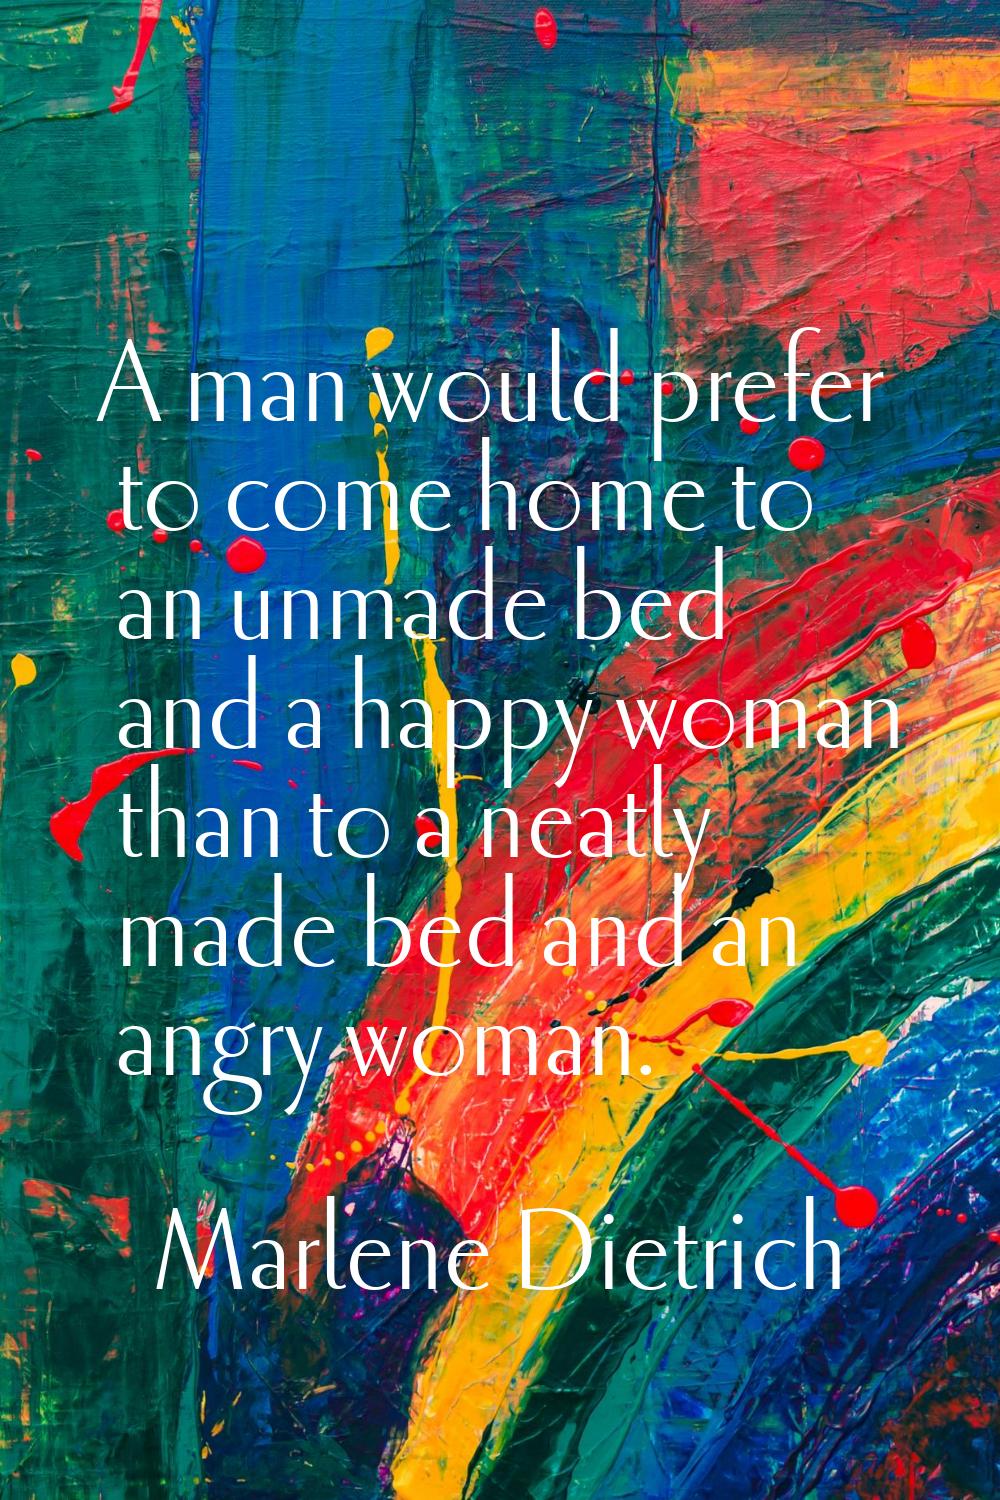 A man would prefer to come home to an unmade bed and a happy woman than to a neatly made bed and an